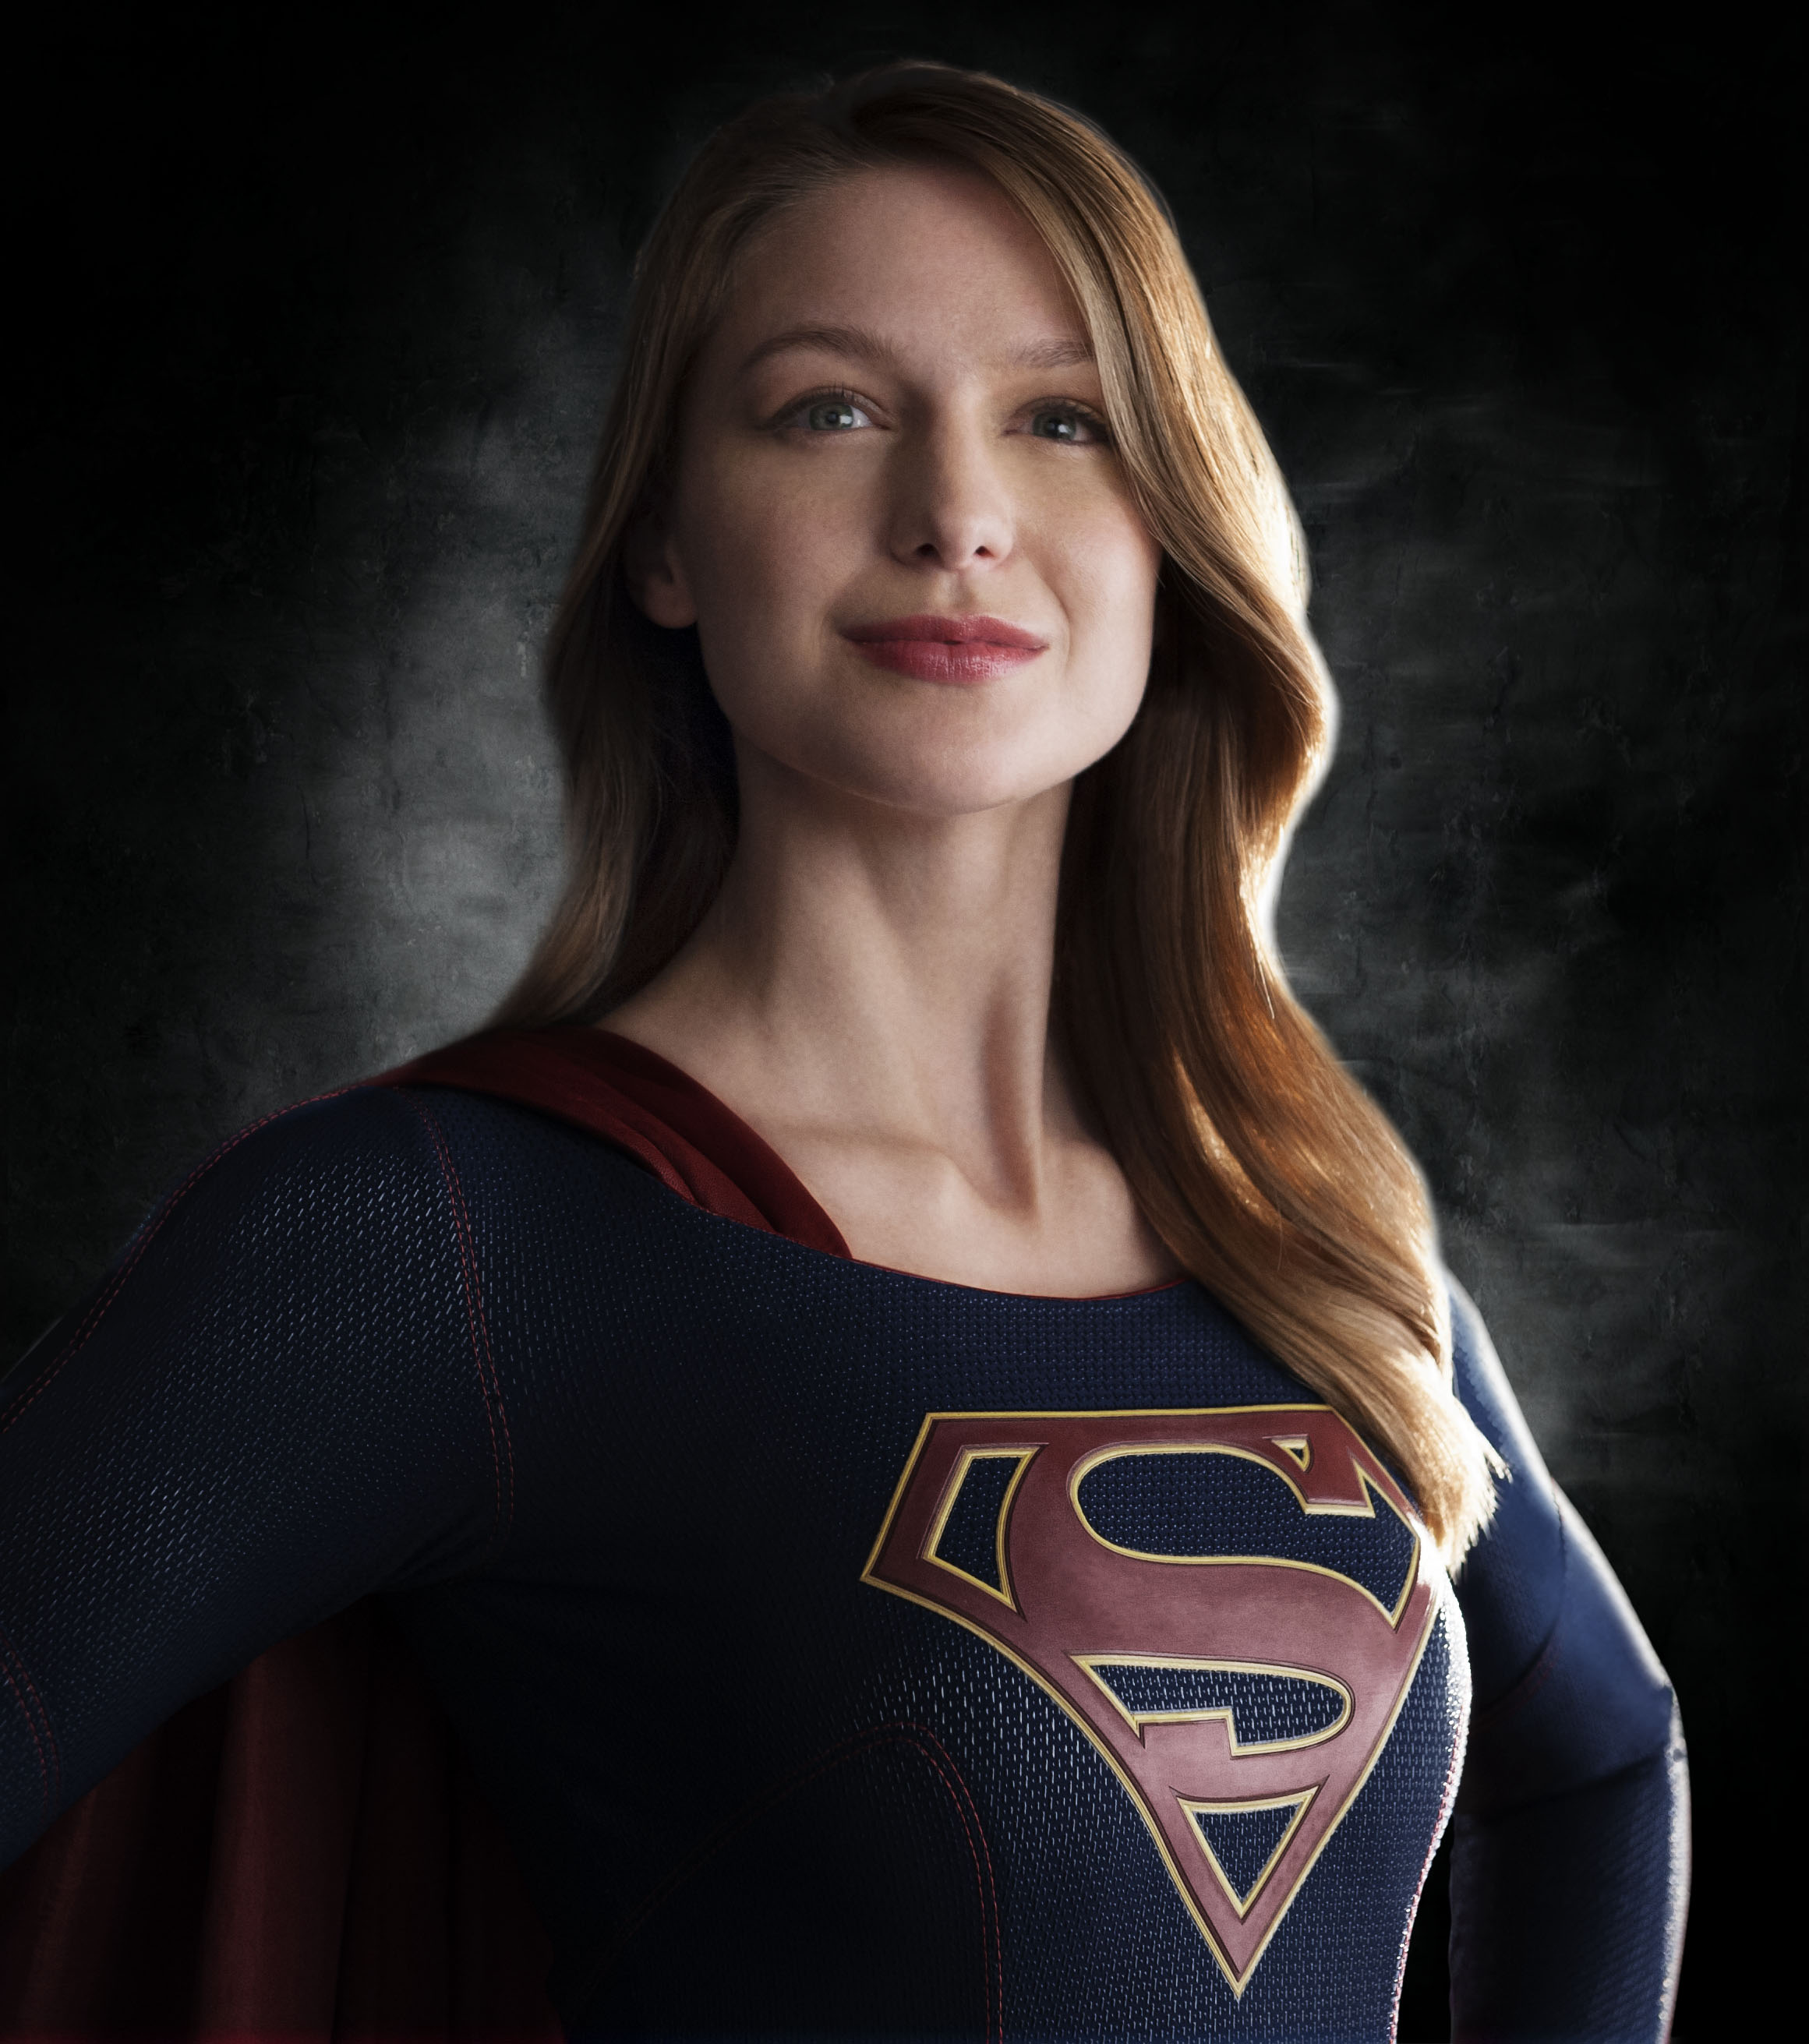 First Look At Supergirl's Costume | The Mary Sue